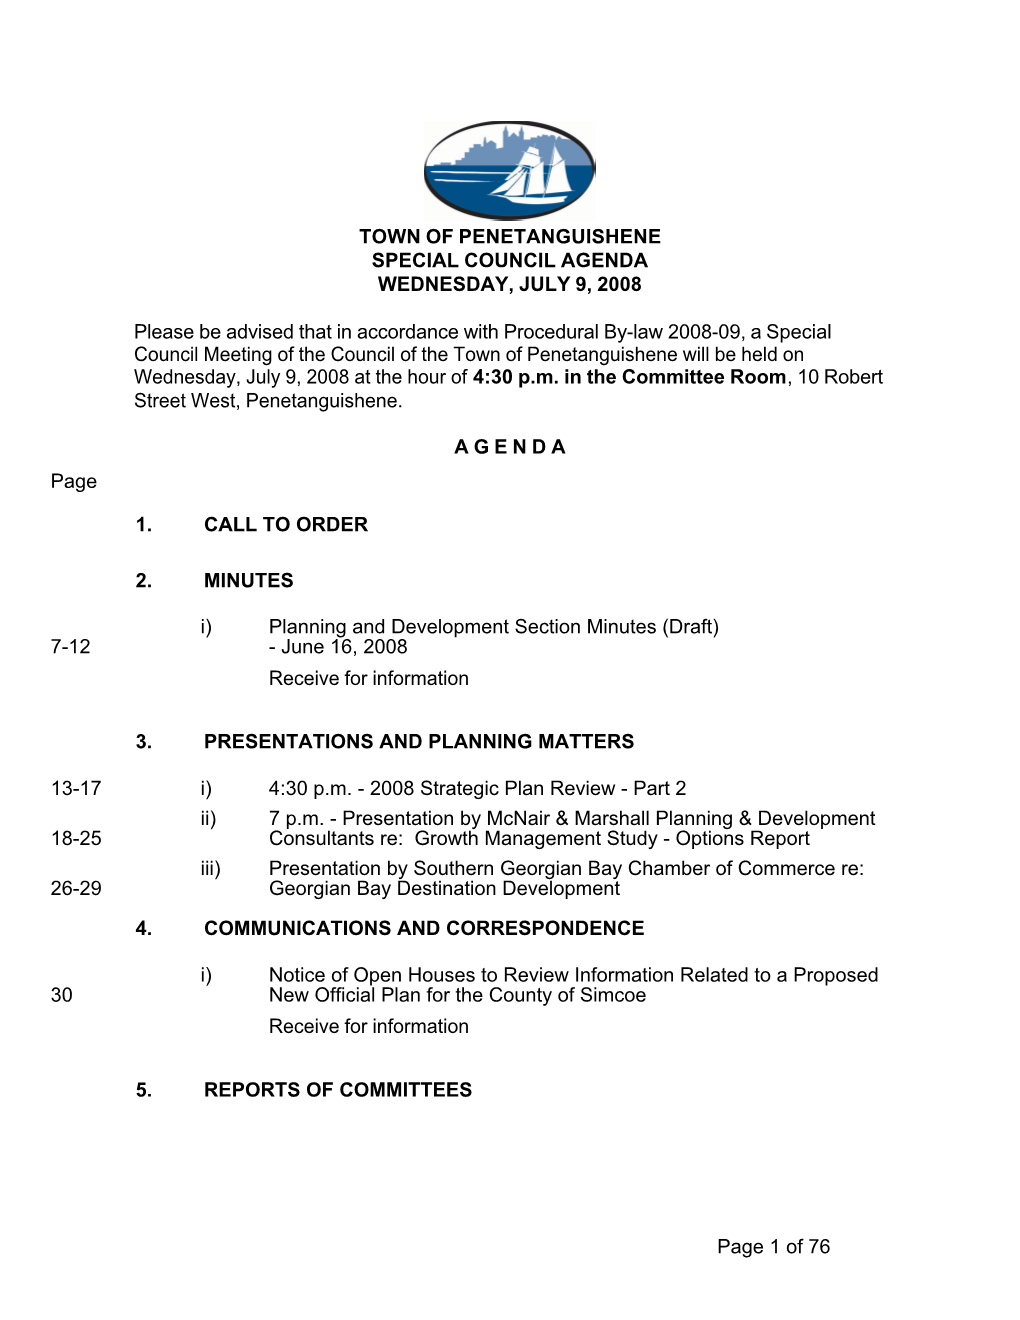 Town of Penetanguishene Special Council Agenda Wednesday, July 9, 2008